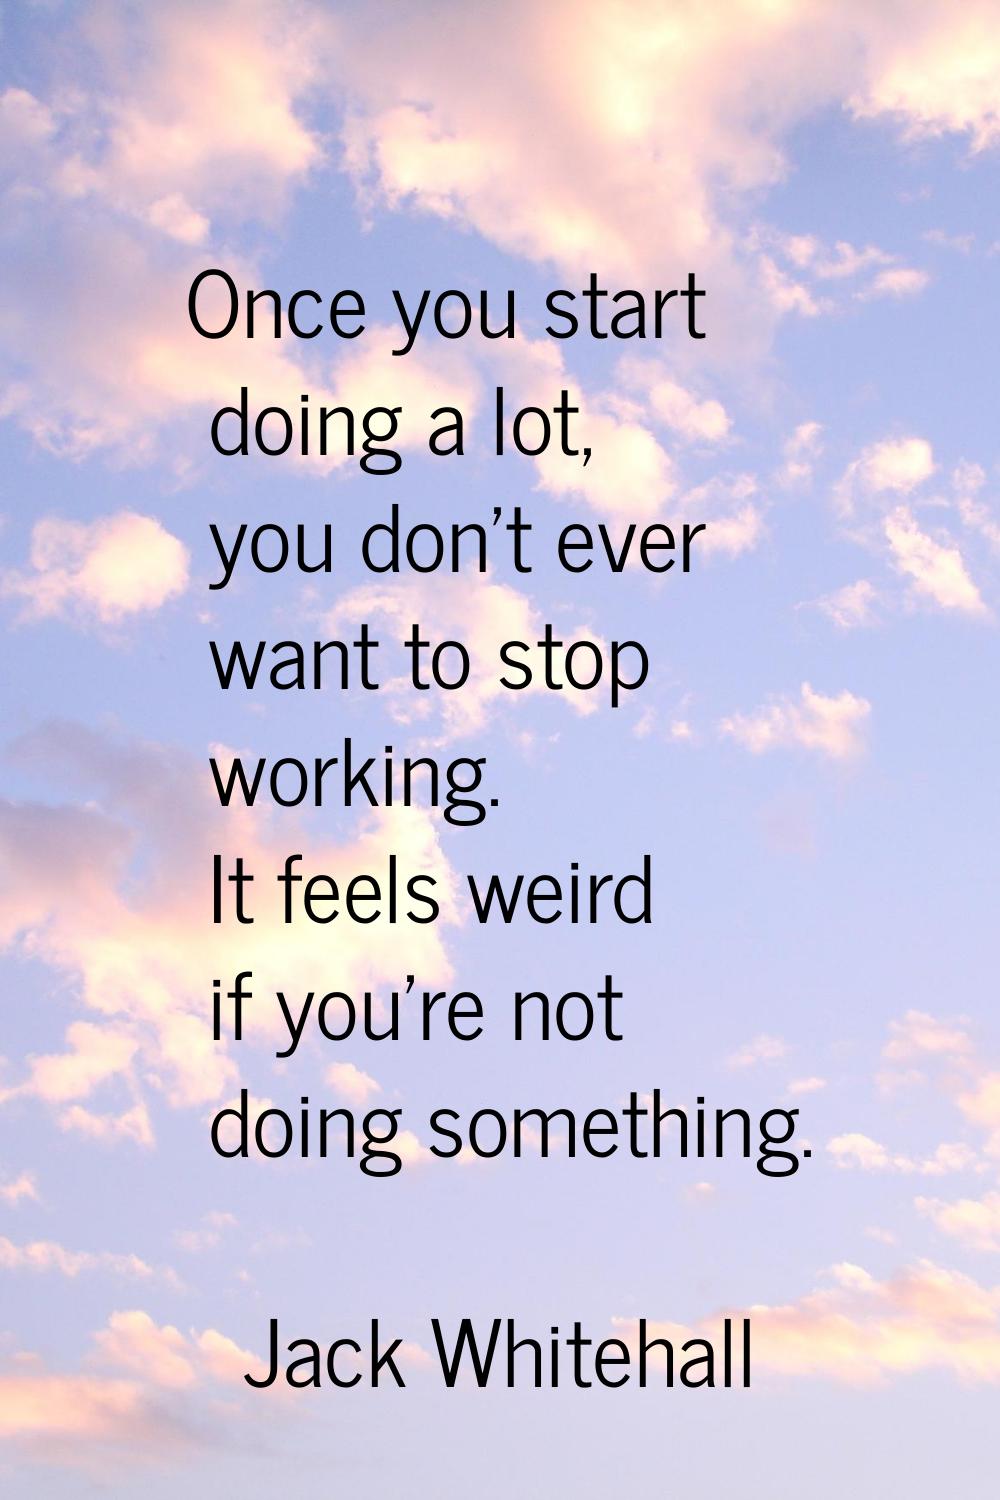 Once you start doing a lot, you don't ever want to stop working. It feels weird if you're not doing